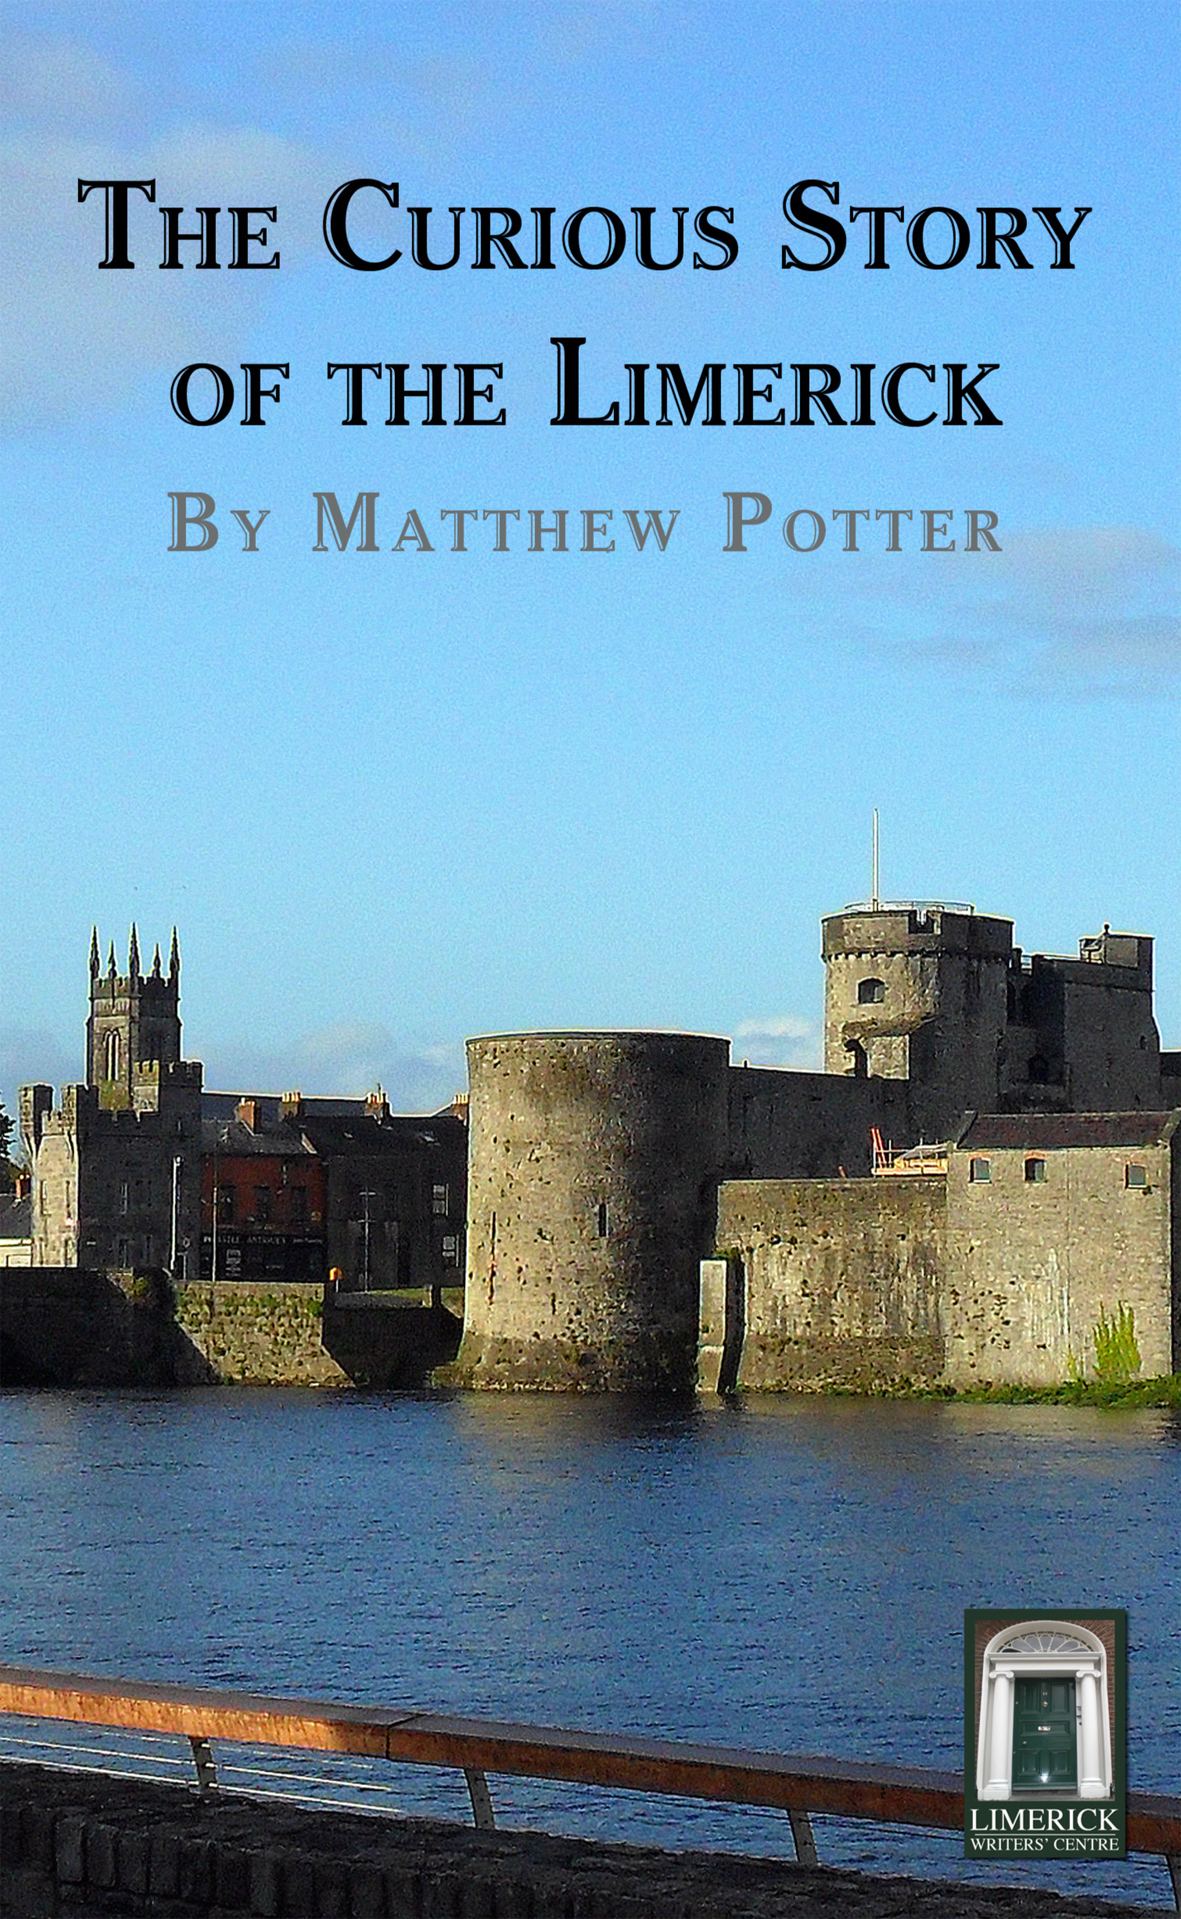 COVER-The curious story of the limerick